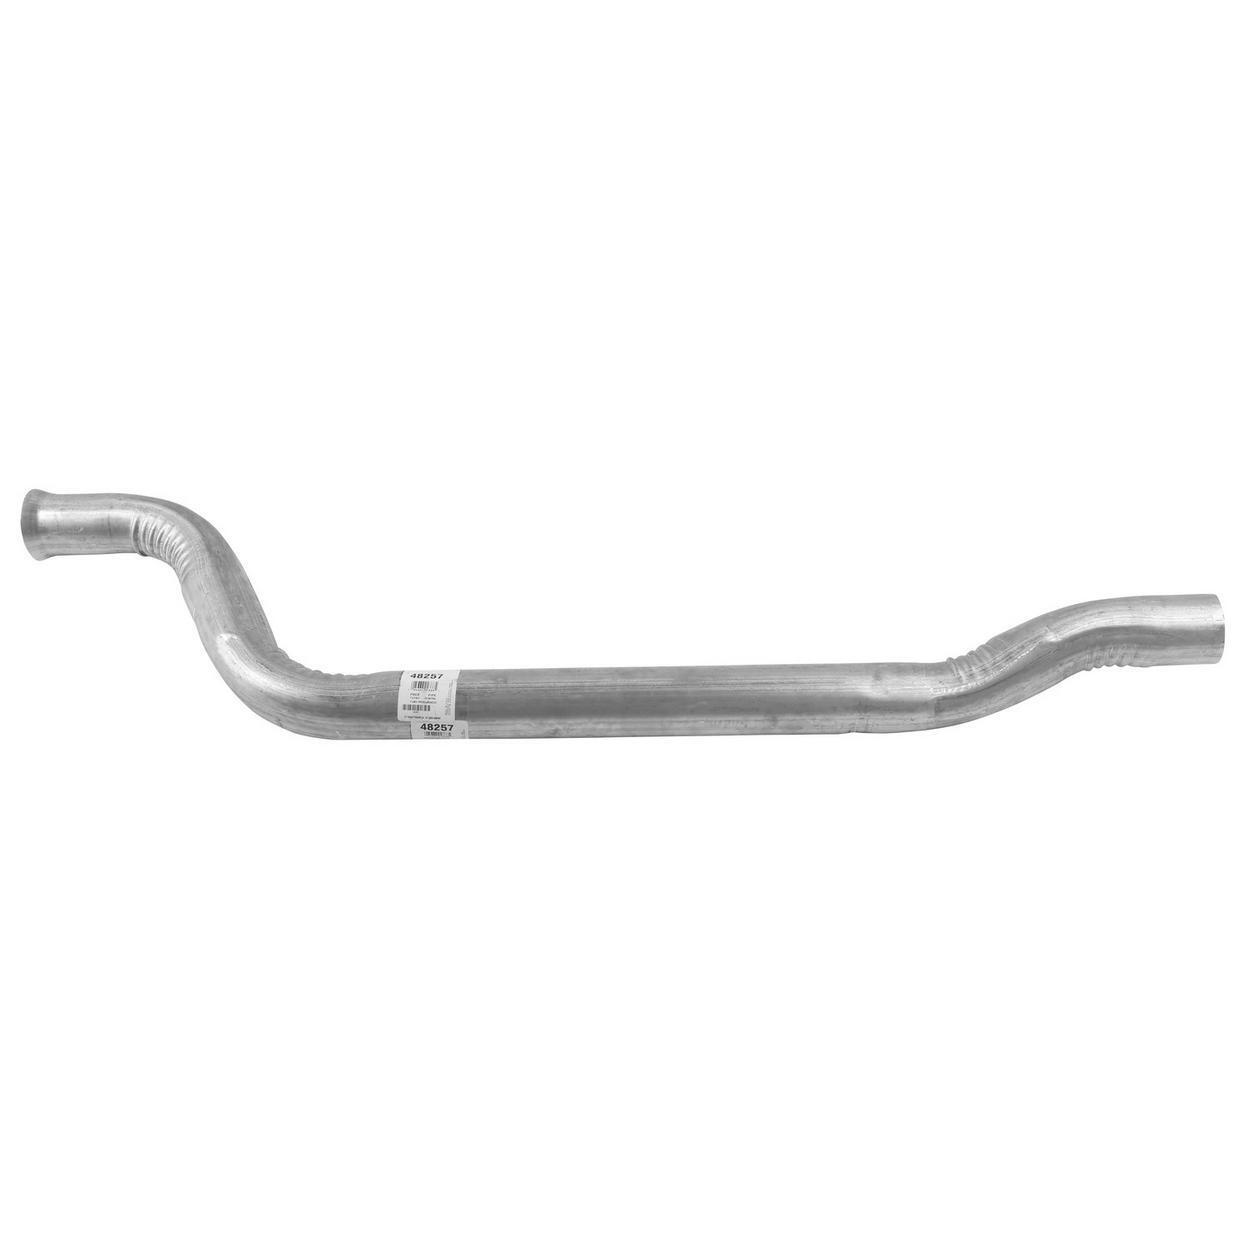 48257-BS Exhaust Pipe Fits 1989 Chevrolet Caprice 5.0L V8 GAS OHV